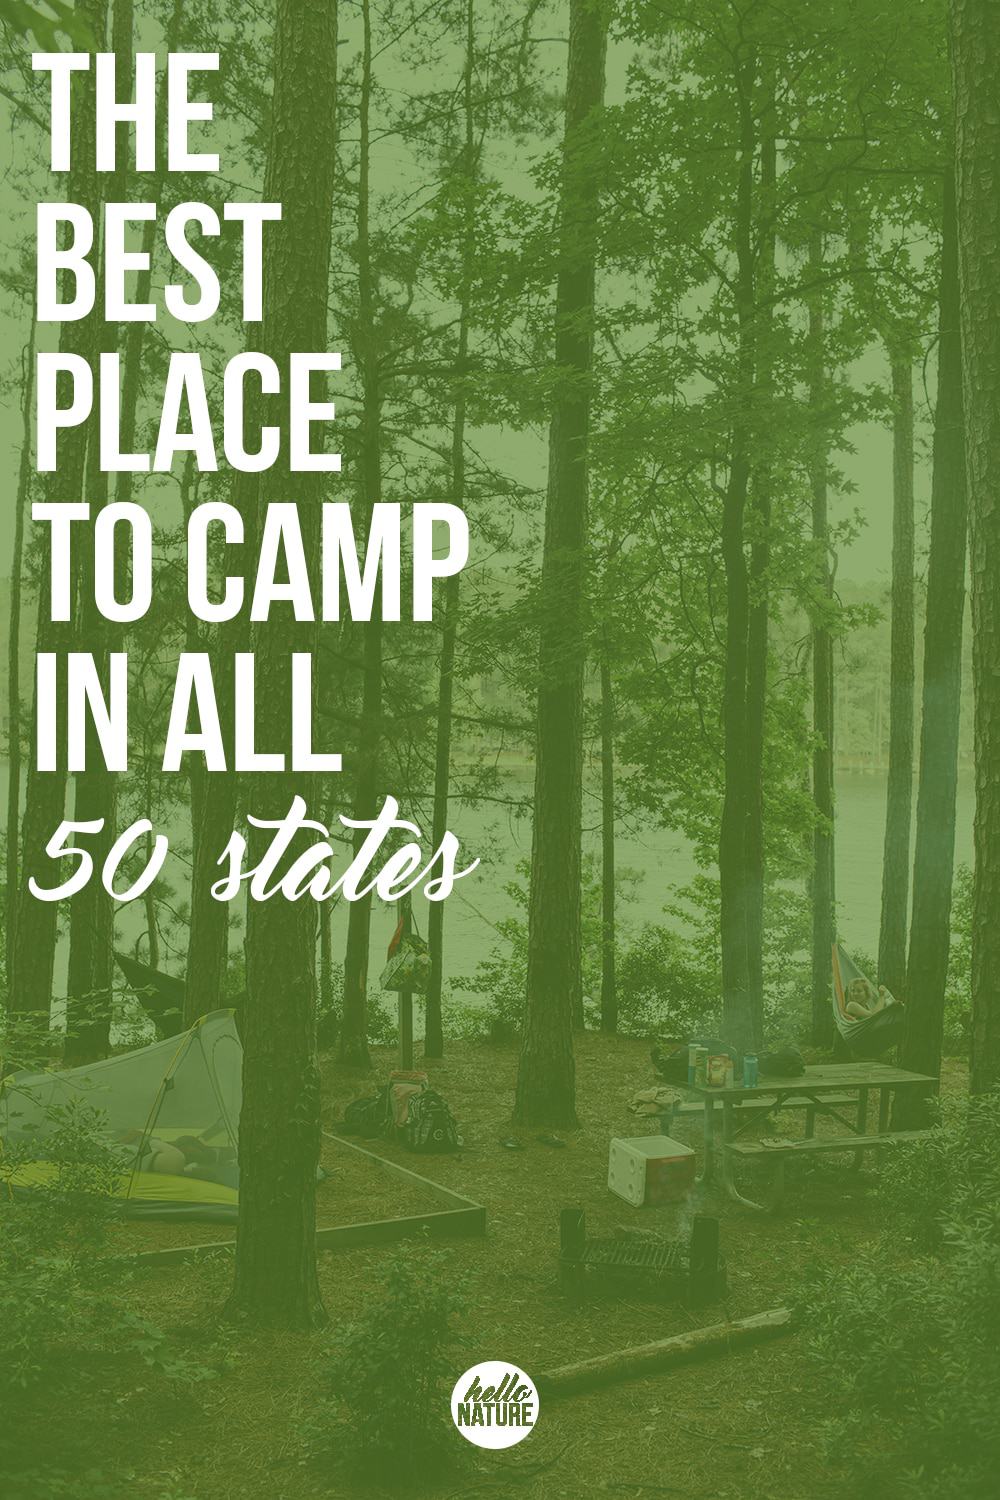 Wisconsin travel blogger Ashley from Hello Nature shares the best campsites across the US. Whether you're looking for tent camping near you, lake camping near you or campsites across the country, Hello Nature has you covered.